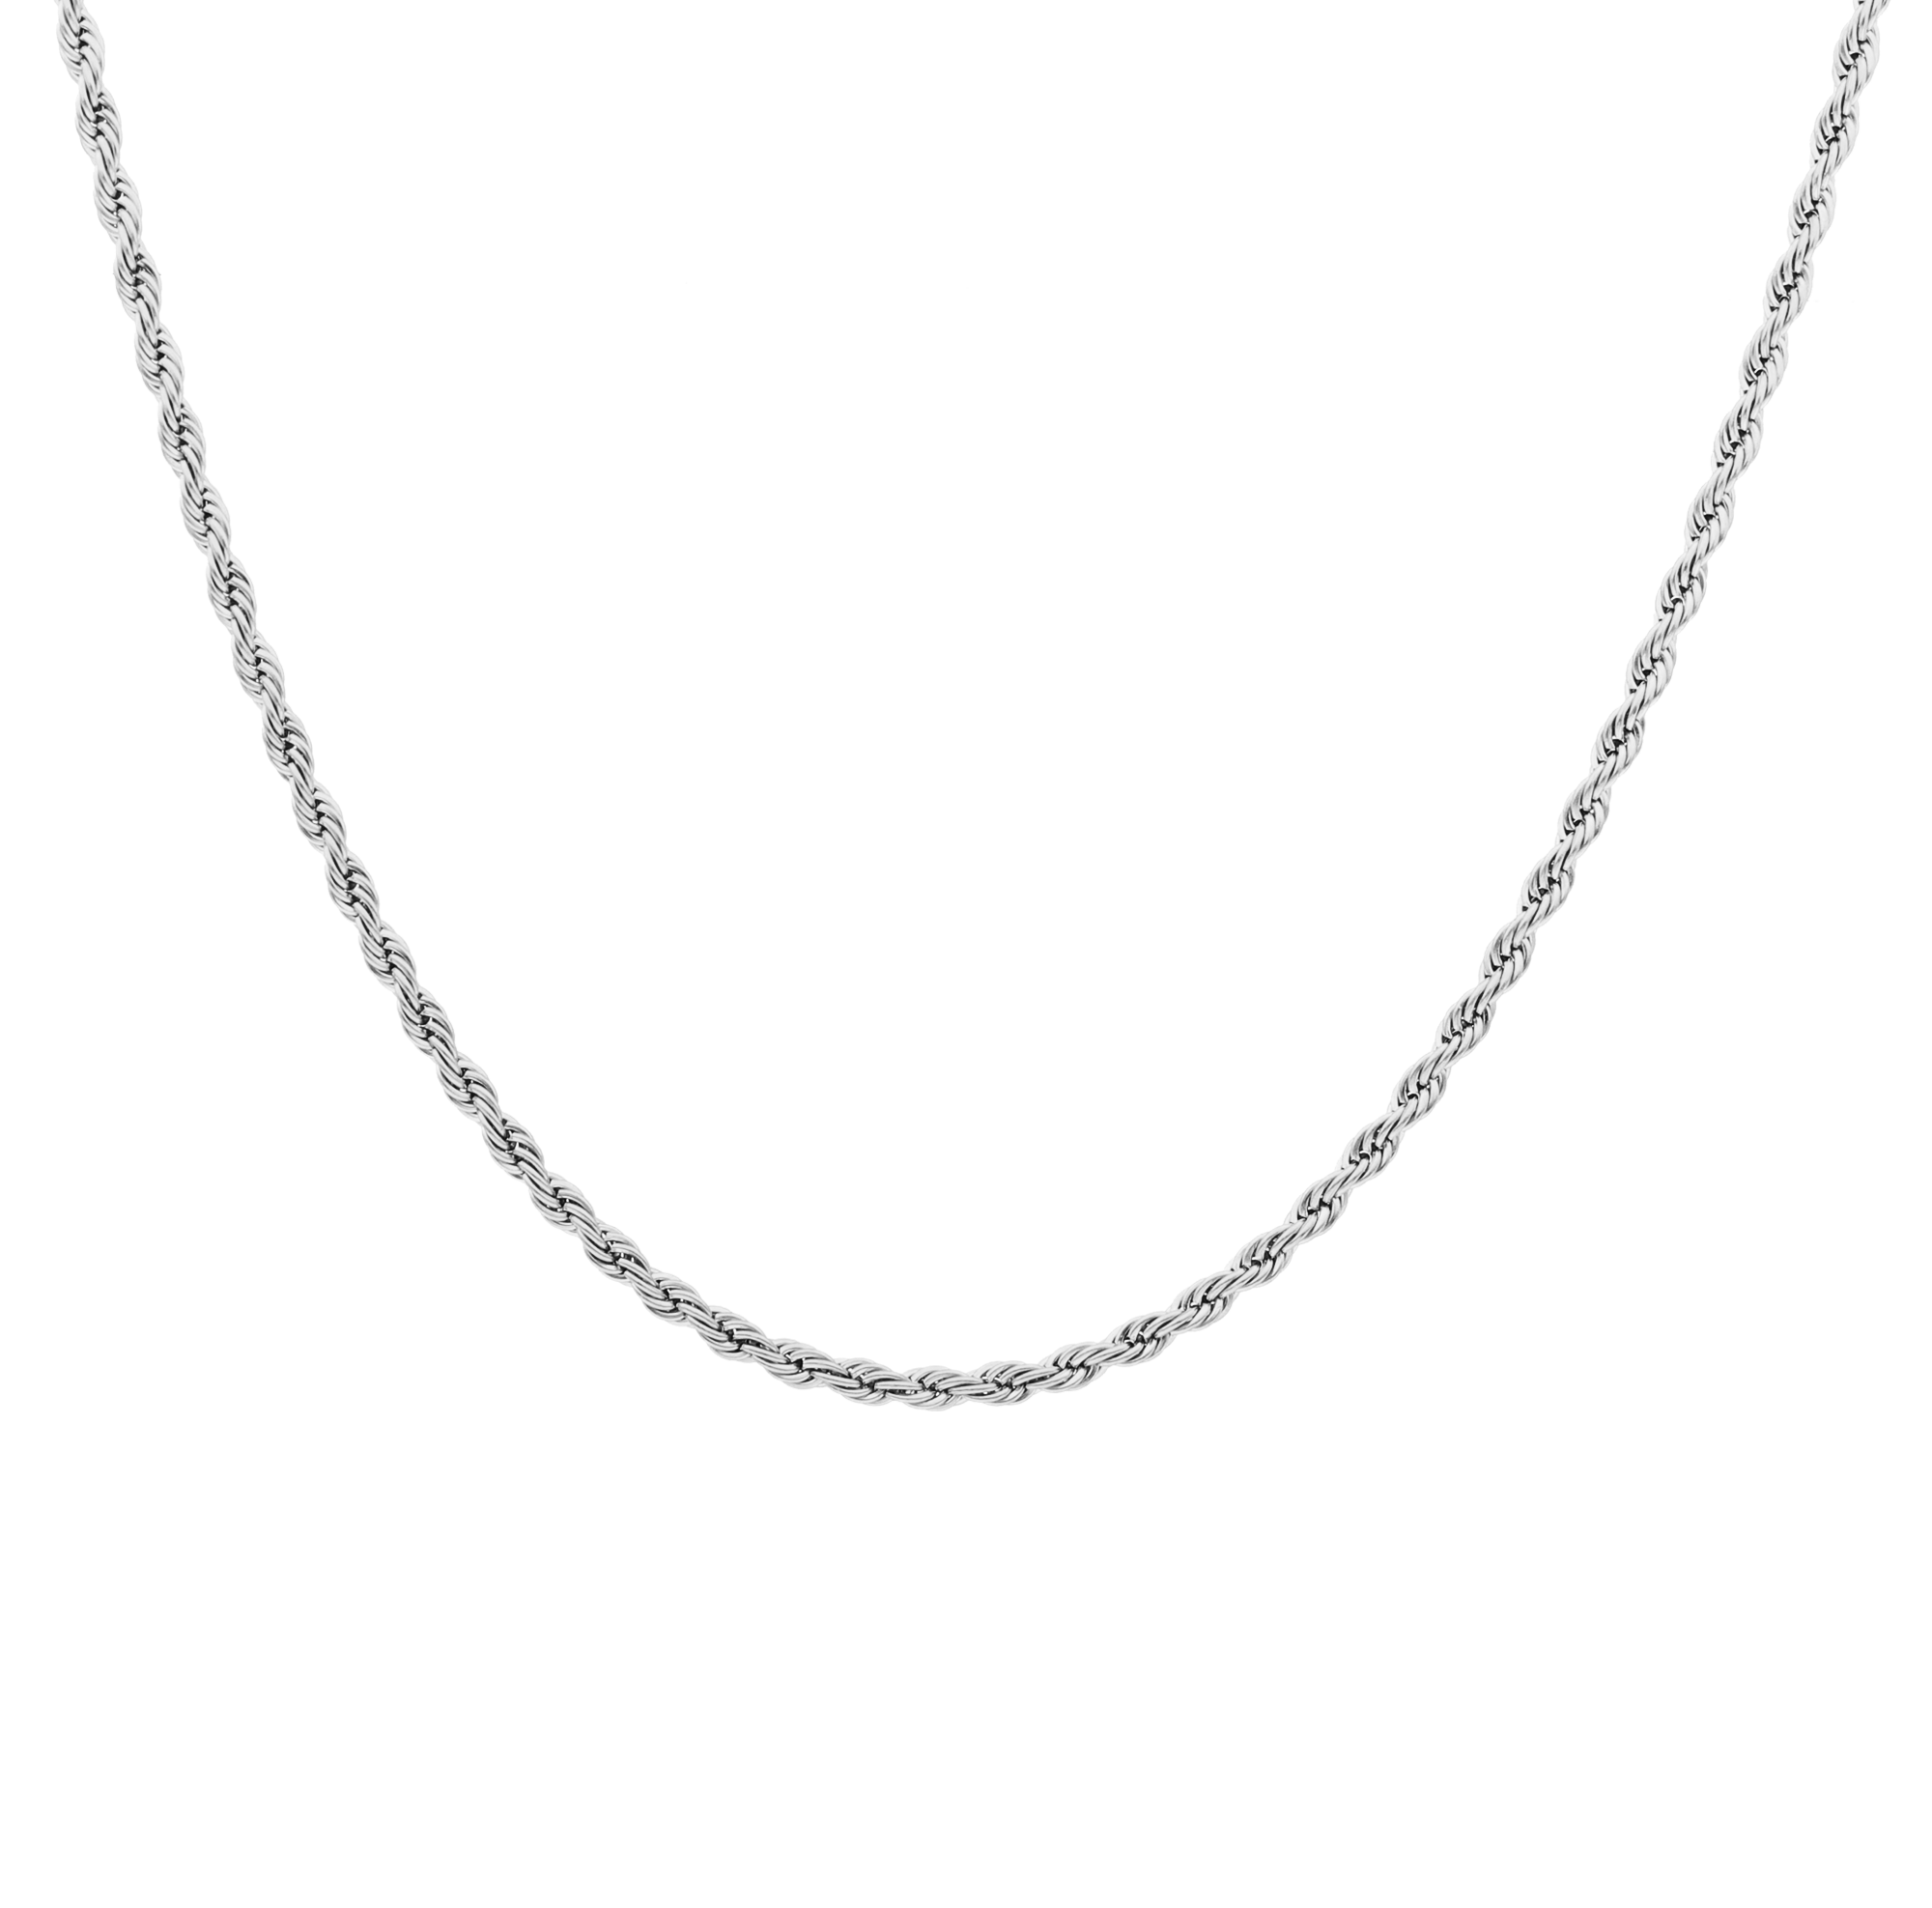 FJ Watches five jwlry jewel jewelry bijou don necklace collier French rope corde torsadé twisted chain chaine silver argent men homme 3.5mm thick montreal canada design water proof resistant eau bold